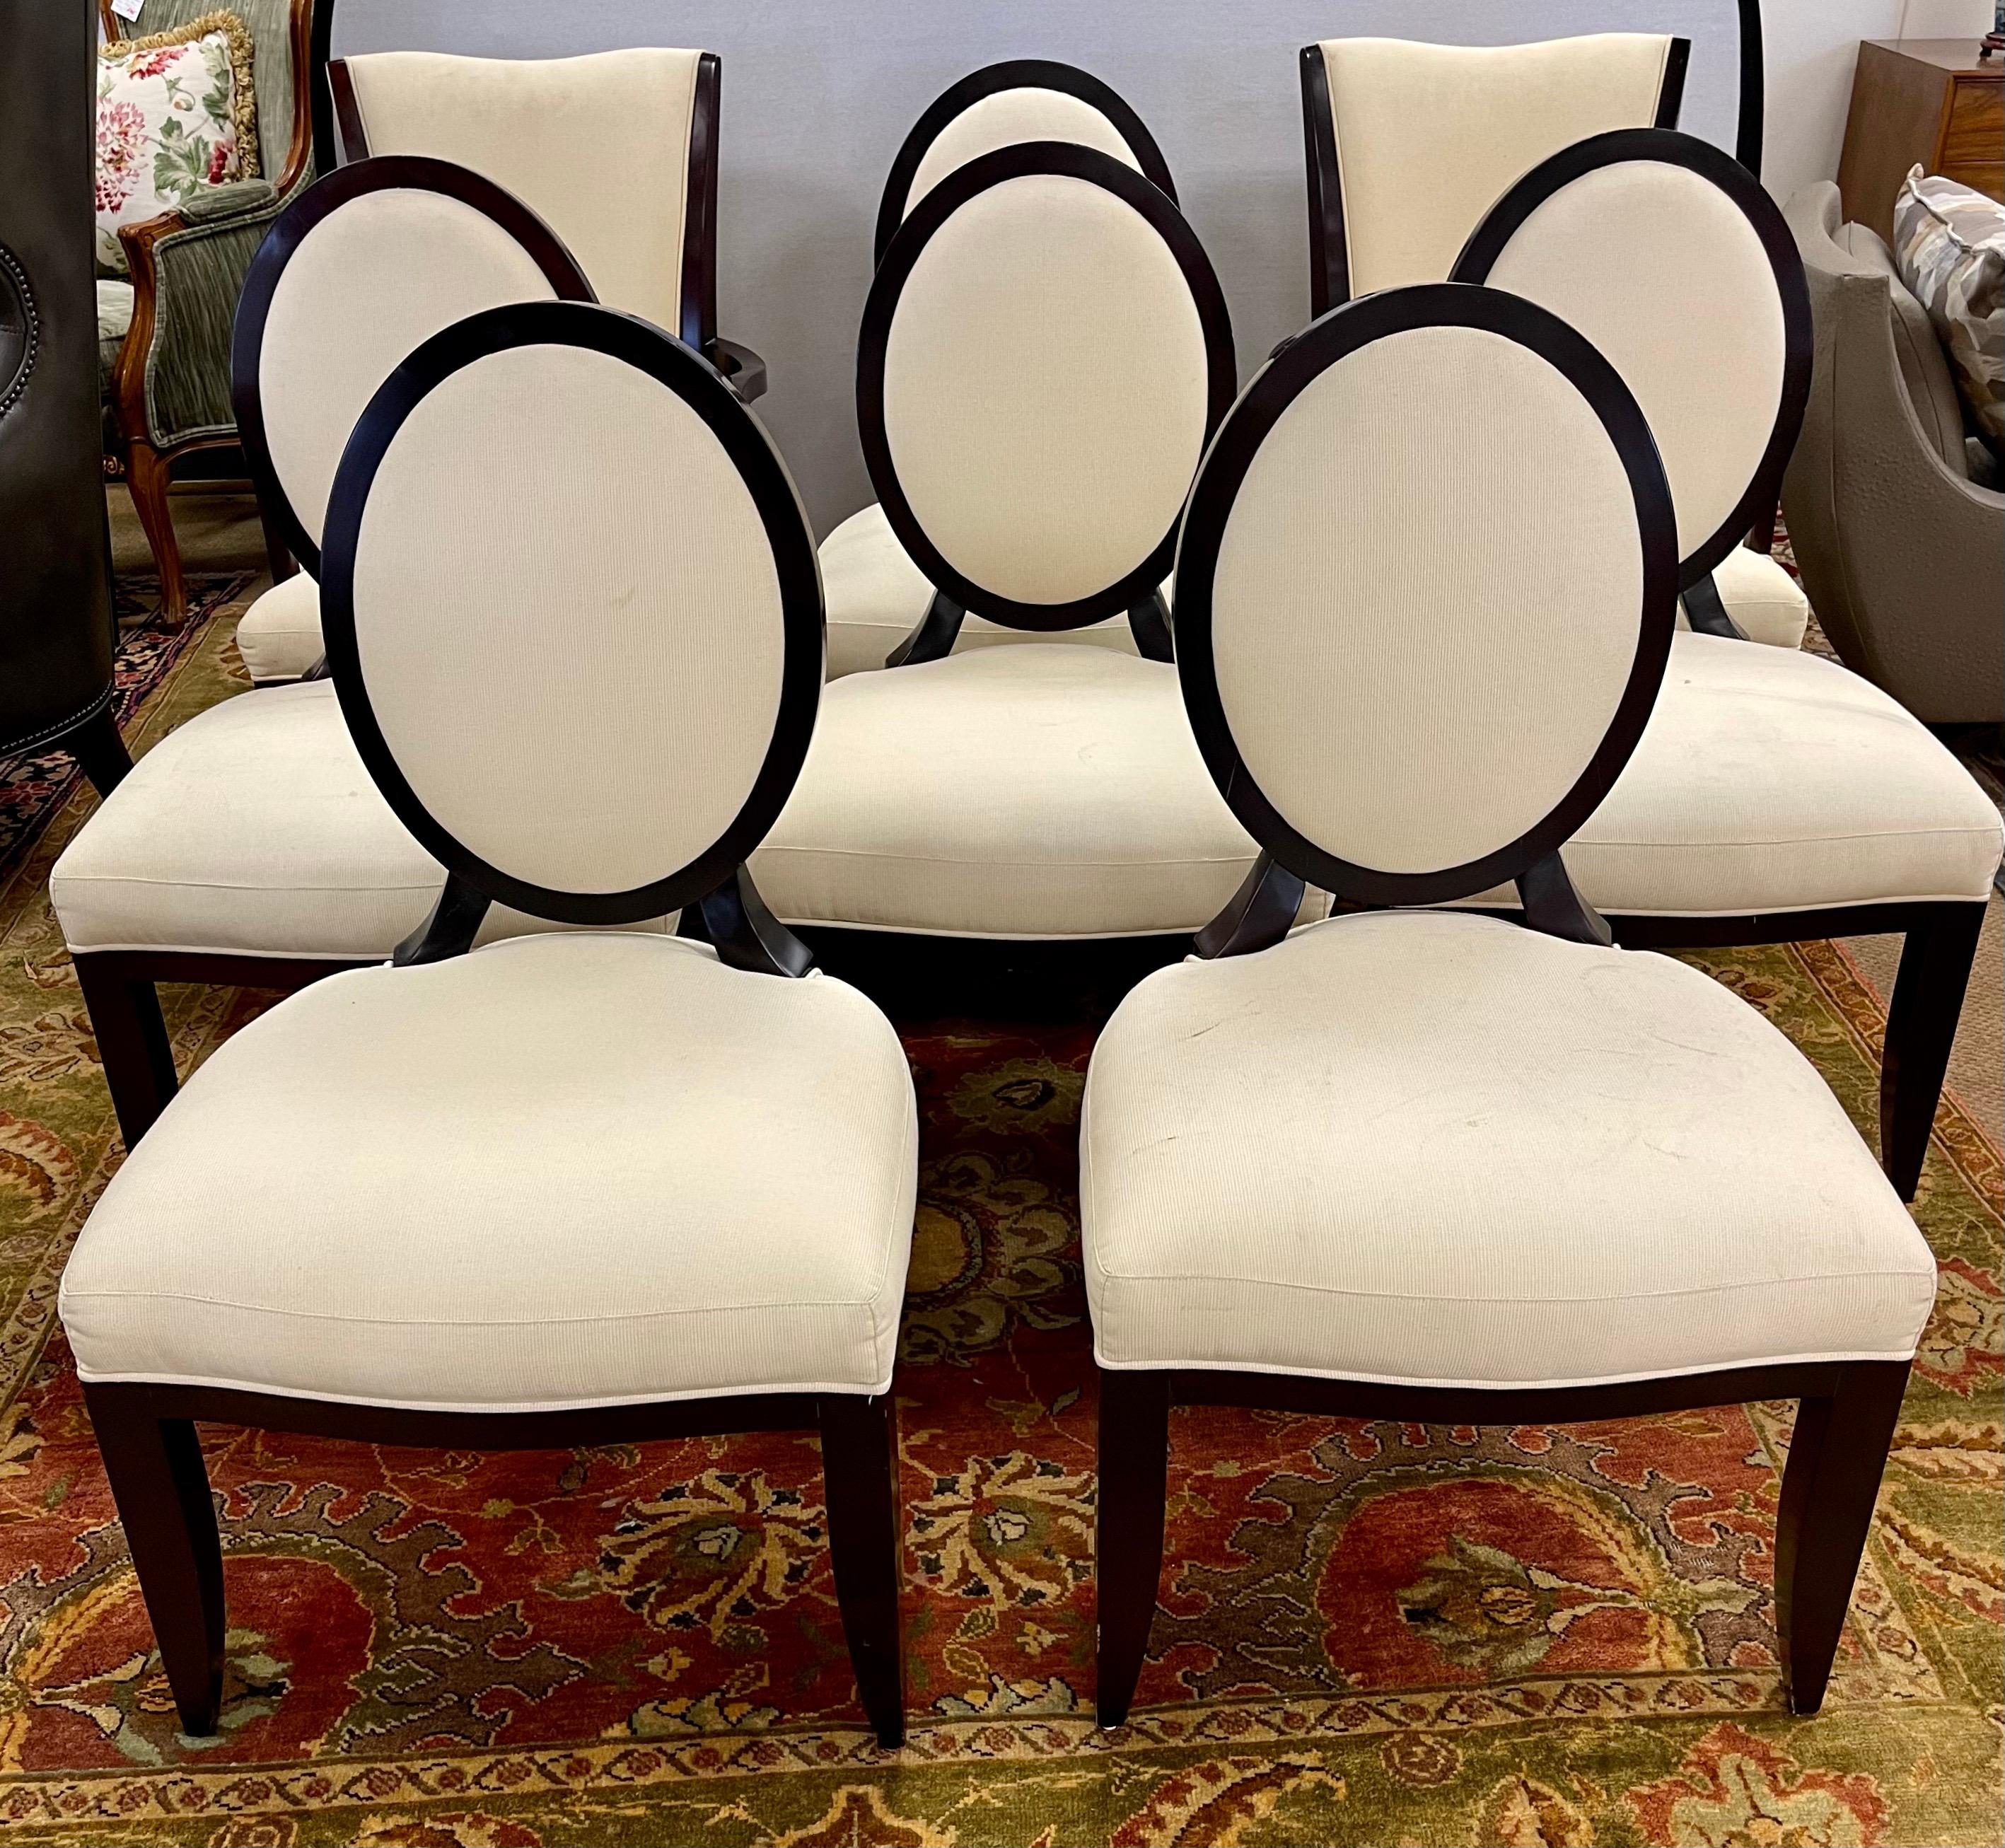 Elegant and coveted set of Baker Furniture dinging chairs designed by Barbara Barry. All hallmarks on bottom. Note there are six oval back side chairs and to arm chairs to round out the set. There is some wear to the mahogany wood and the fabric on